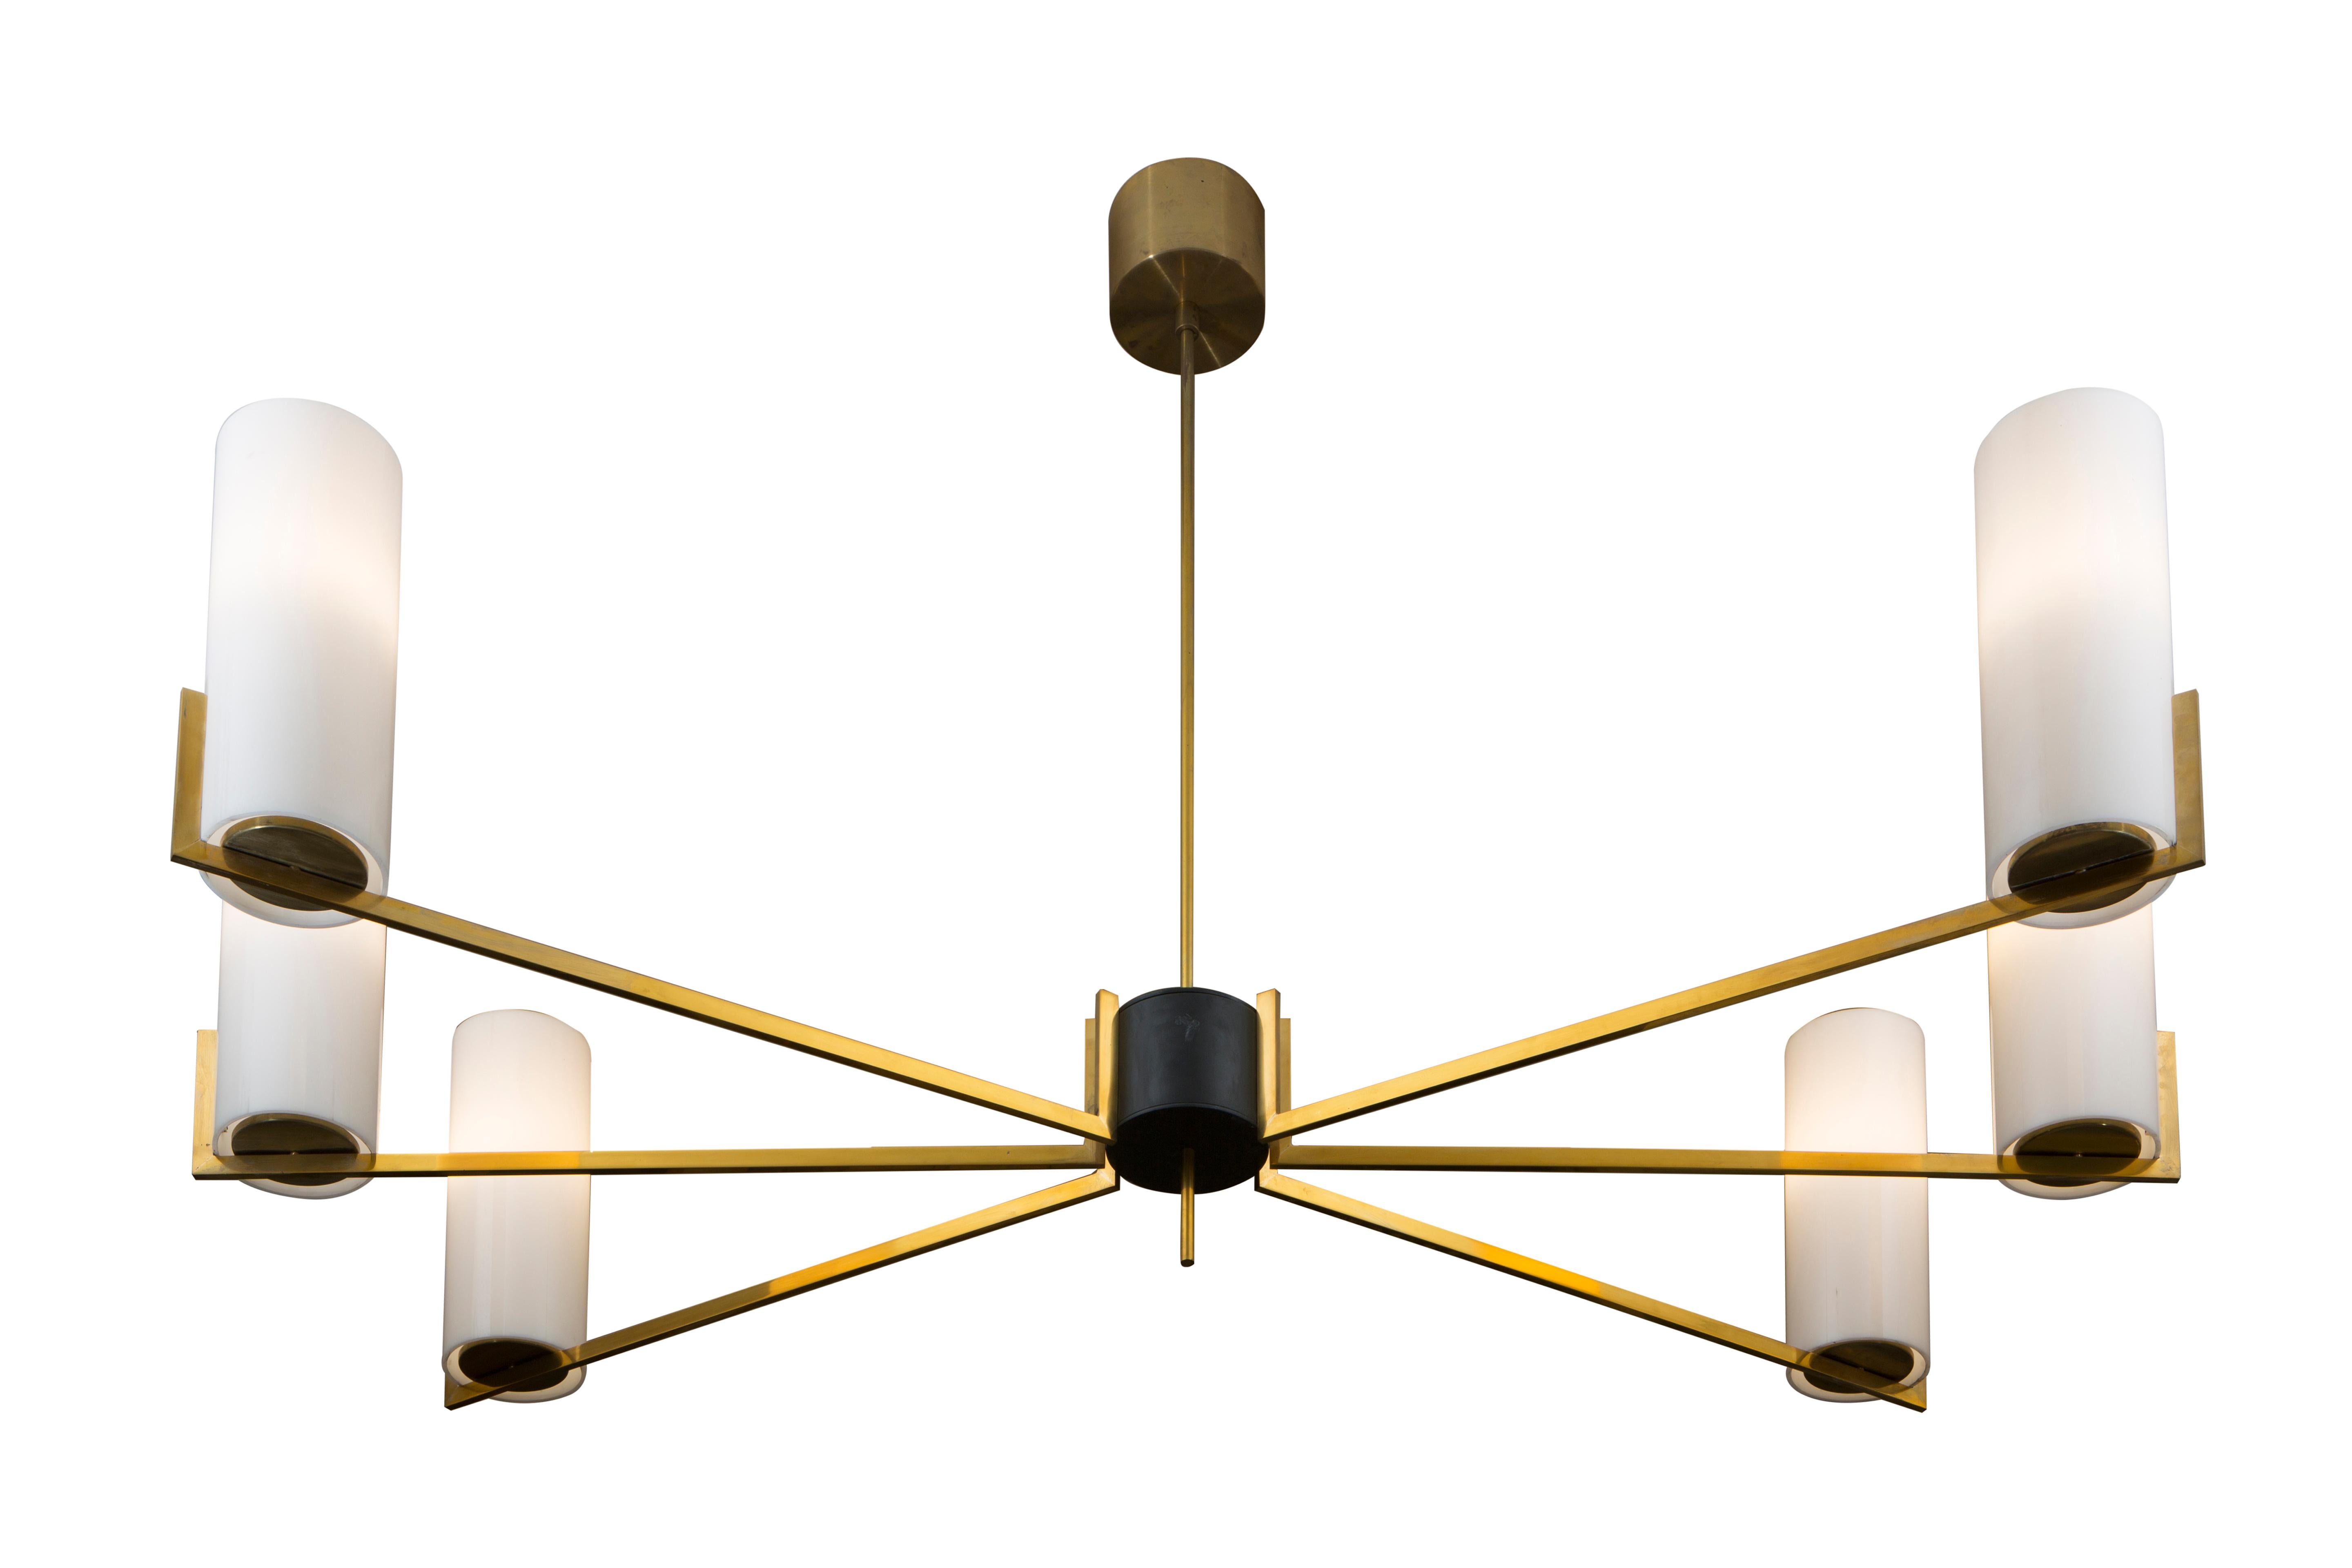 This exquisite piece, inspired by the landscape of Los Angeles in the 30s with its elegant Cafe Society atmosphere, will bring a touch of modern sophistication to any home. The brass structure is comprised by a center shaft from which six brass arms